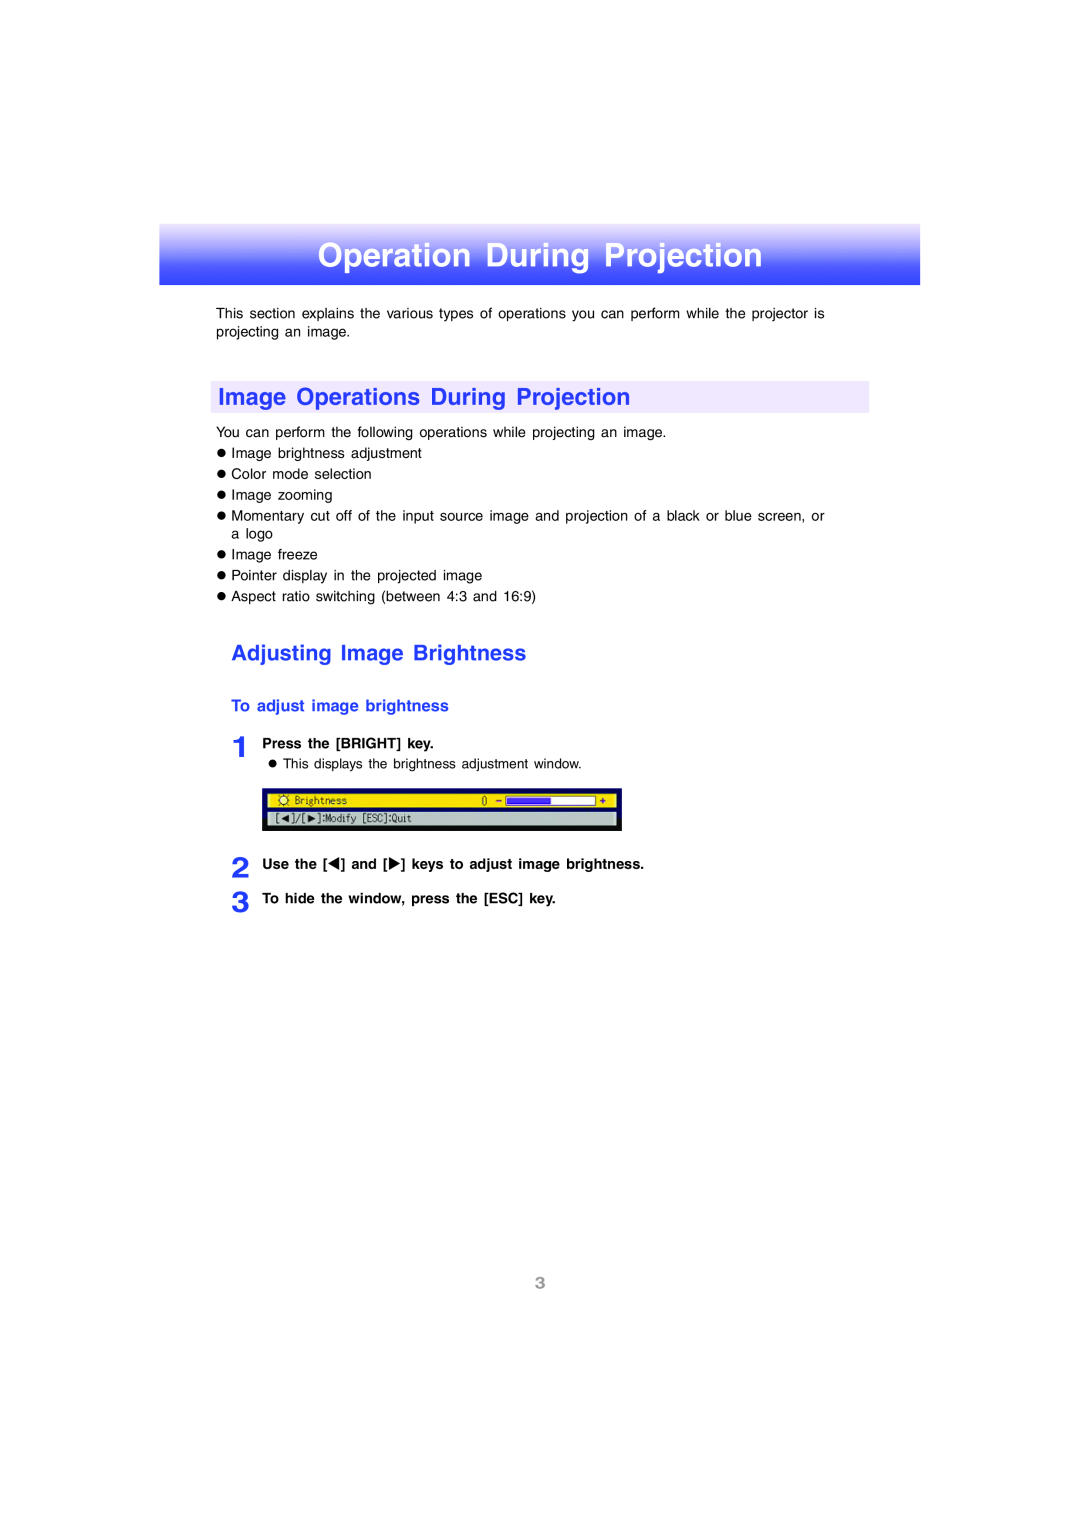 InFocus IN12 manual Operation During Projection, Image Operations During Projection, Adjusting Image Brightness 